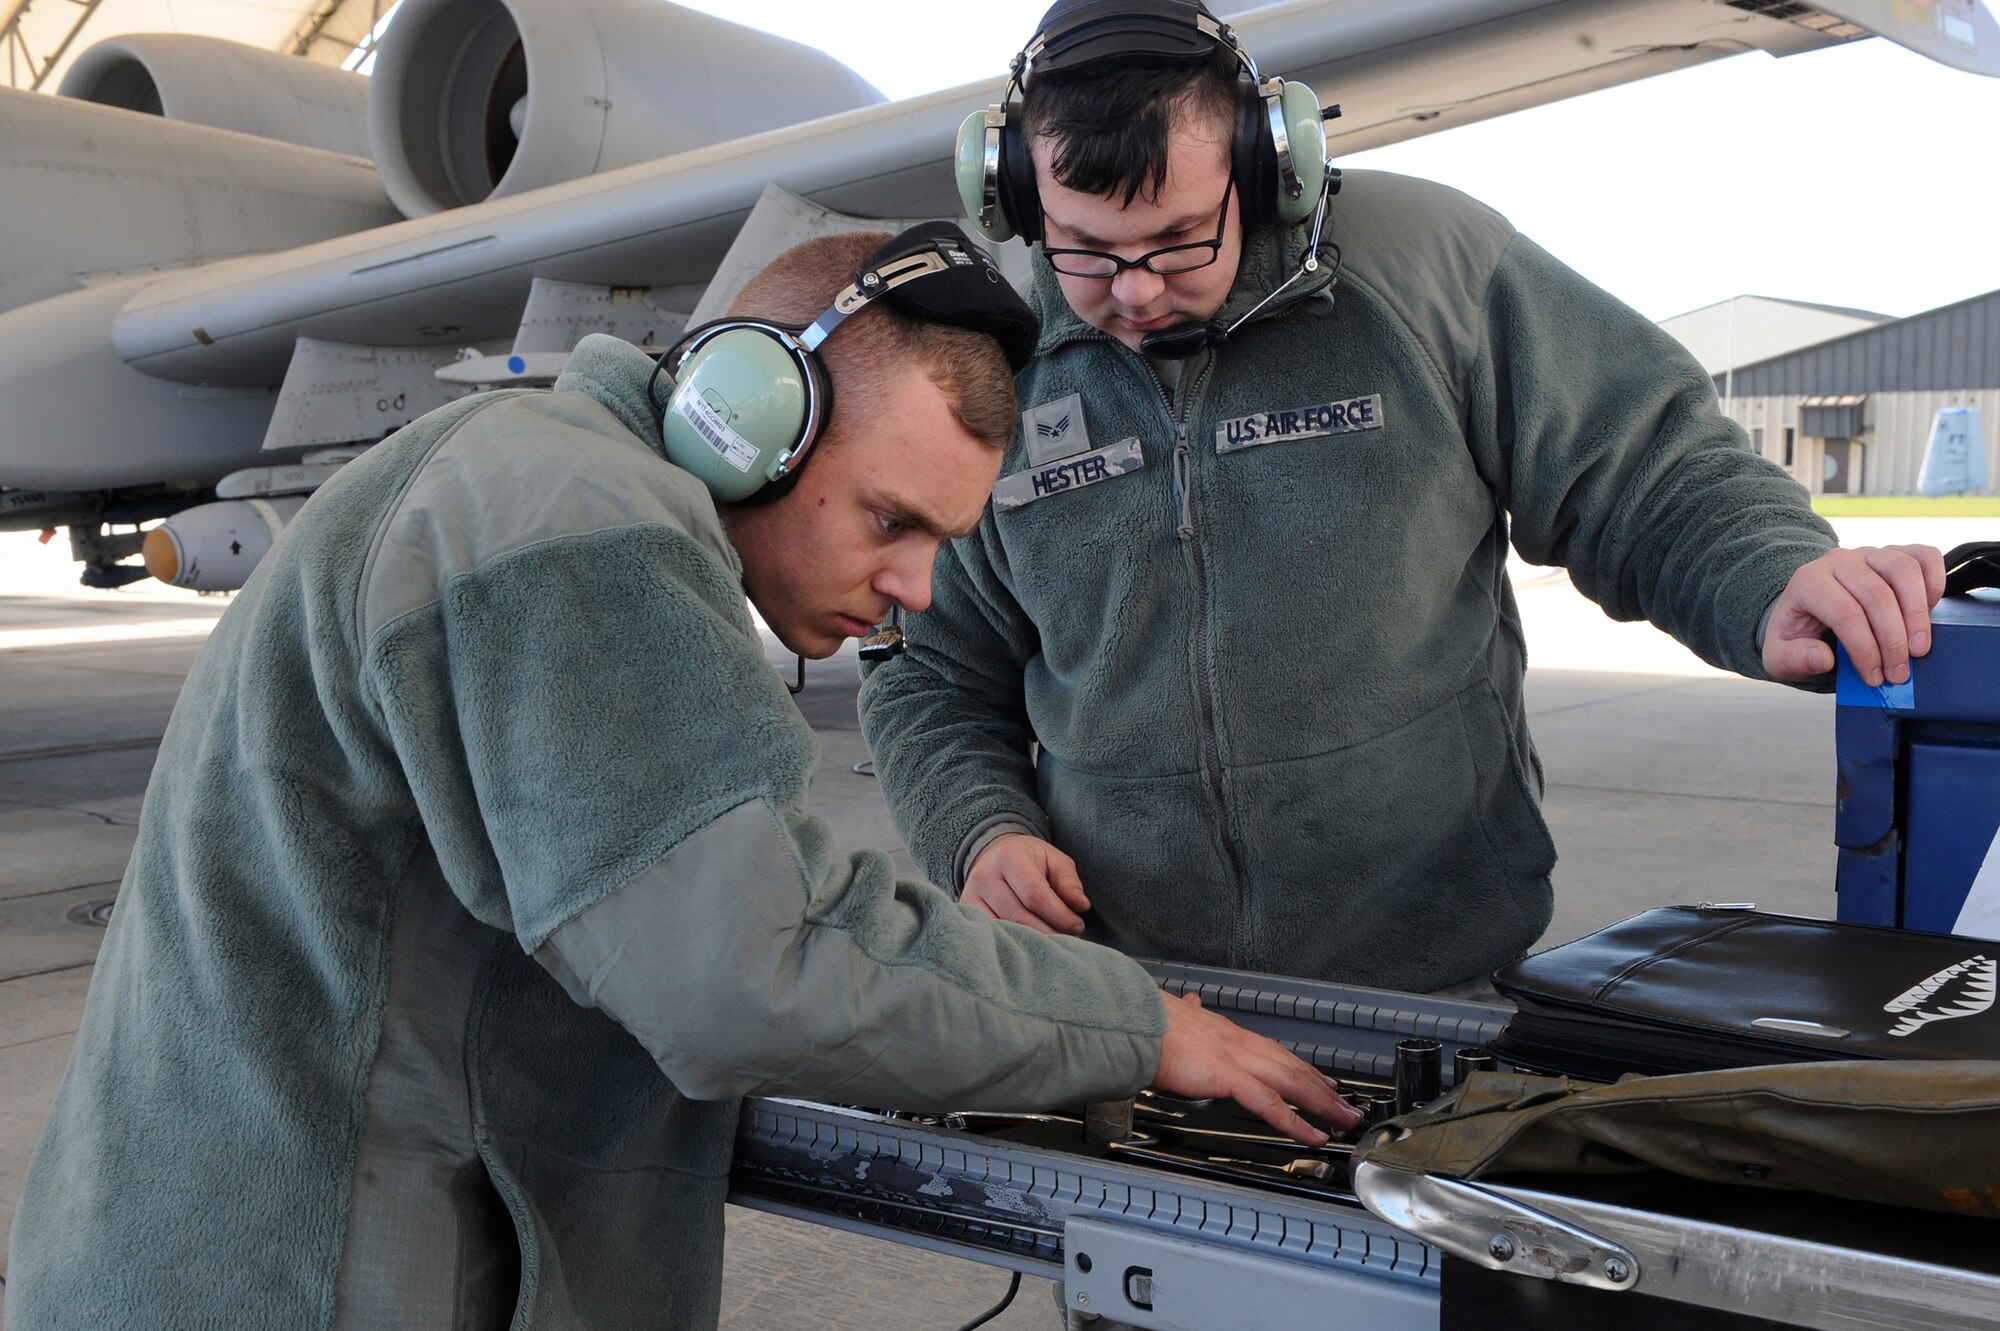 U.S. Air Force Airman 1st Class Chris Renfroe, 74th Aircraft Maintenance Unit crew chief, left, and Senior Airman Tyler Hester, 476th Maintenance Squadron crew chief, take inventory of their toolbox before launching an A-10C Thunderbolt II, Jan. 5, 2016, at Moody Air Force Base, Ga. Crew chiefs take account of everything in the toolbox before a flight to prevent damages to the aircraft. (U.S. Air Force photo by Airman 1st Class Kathleen D. Bryant/Released)


